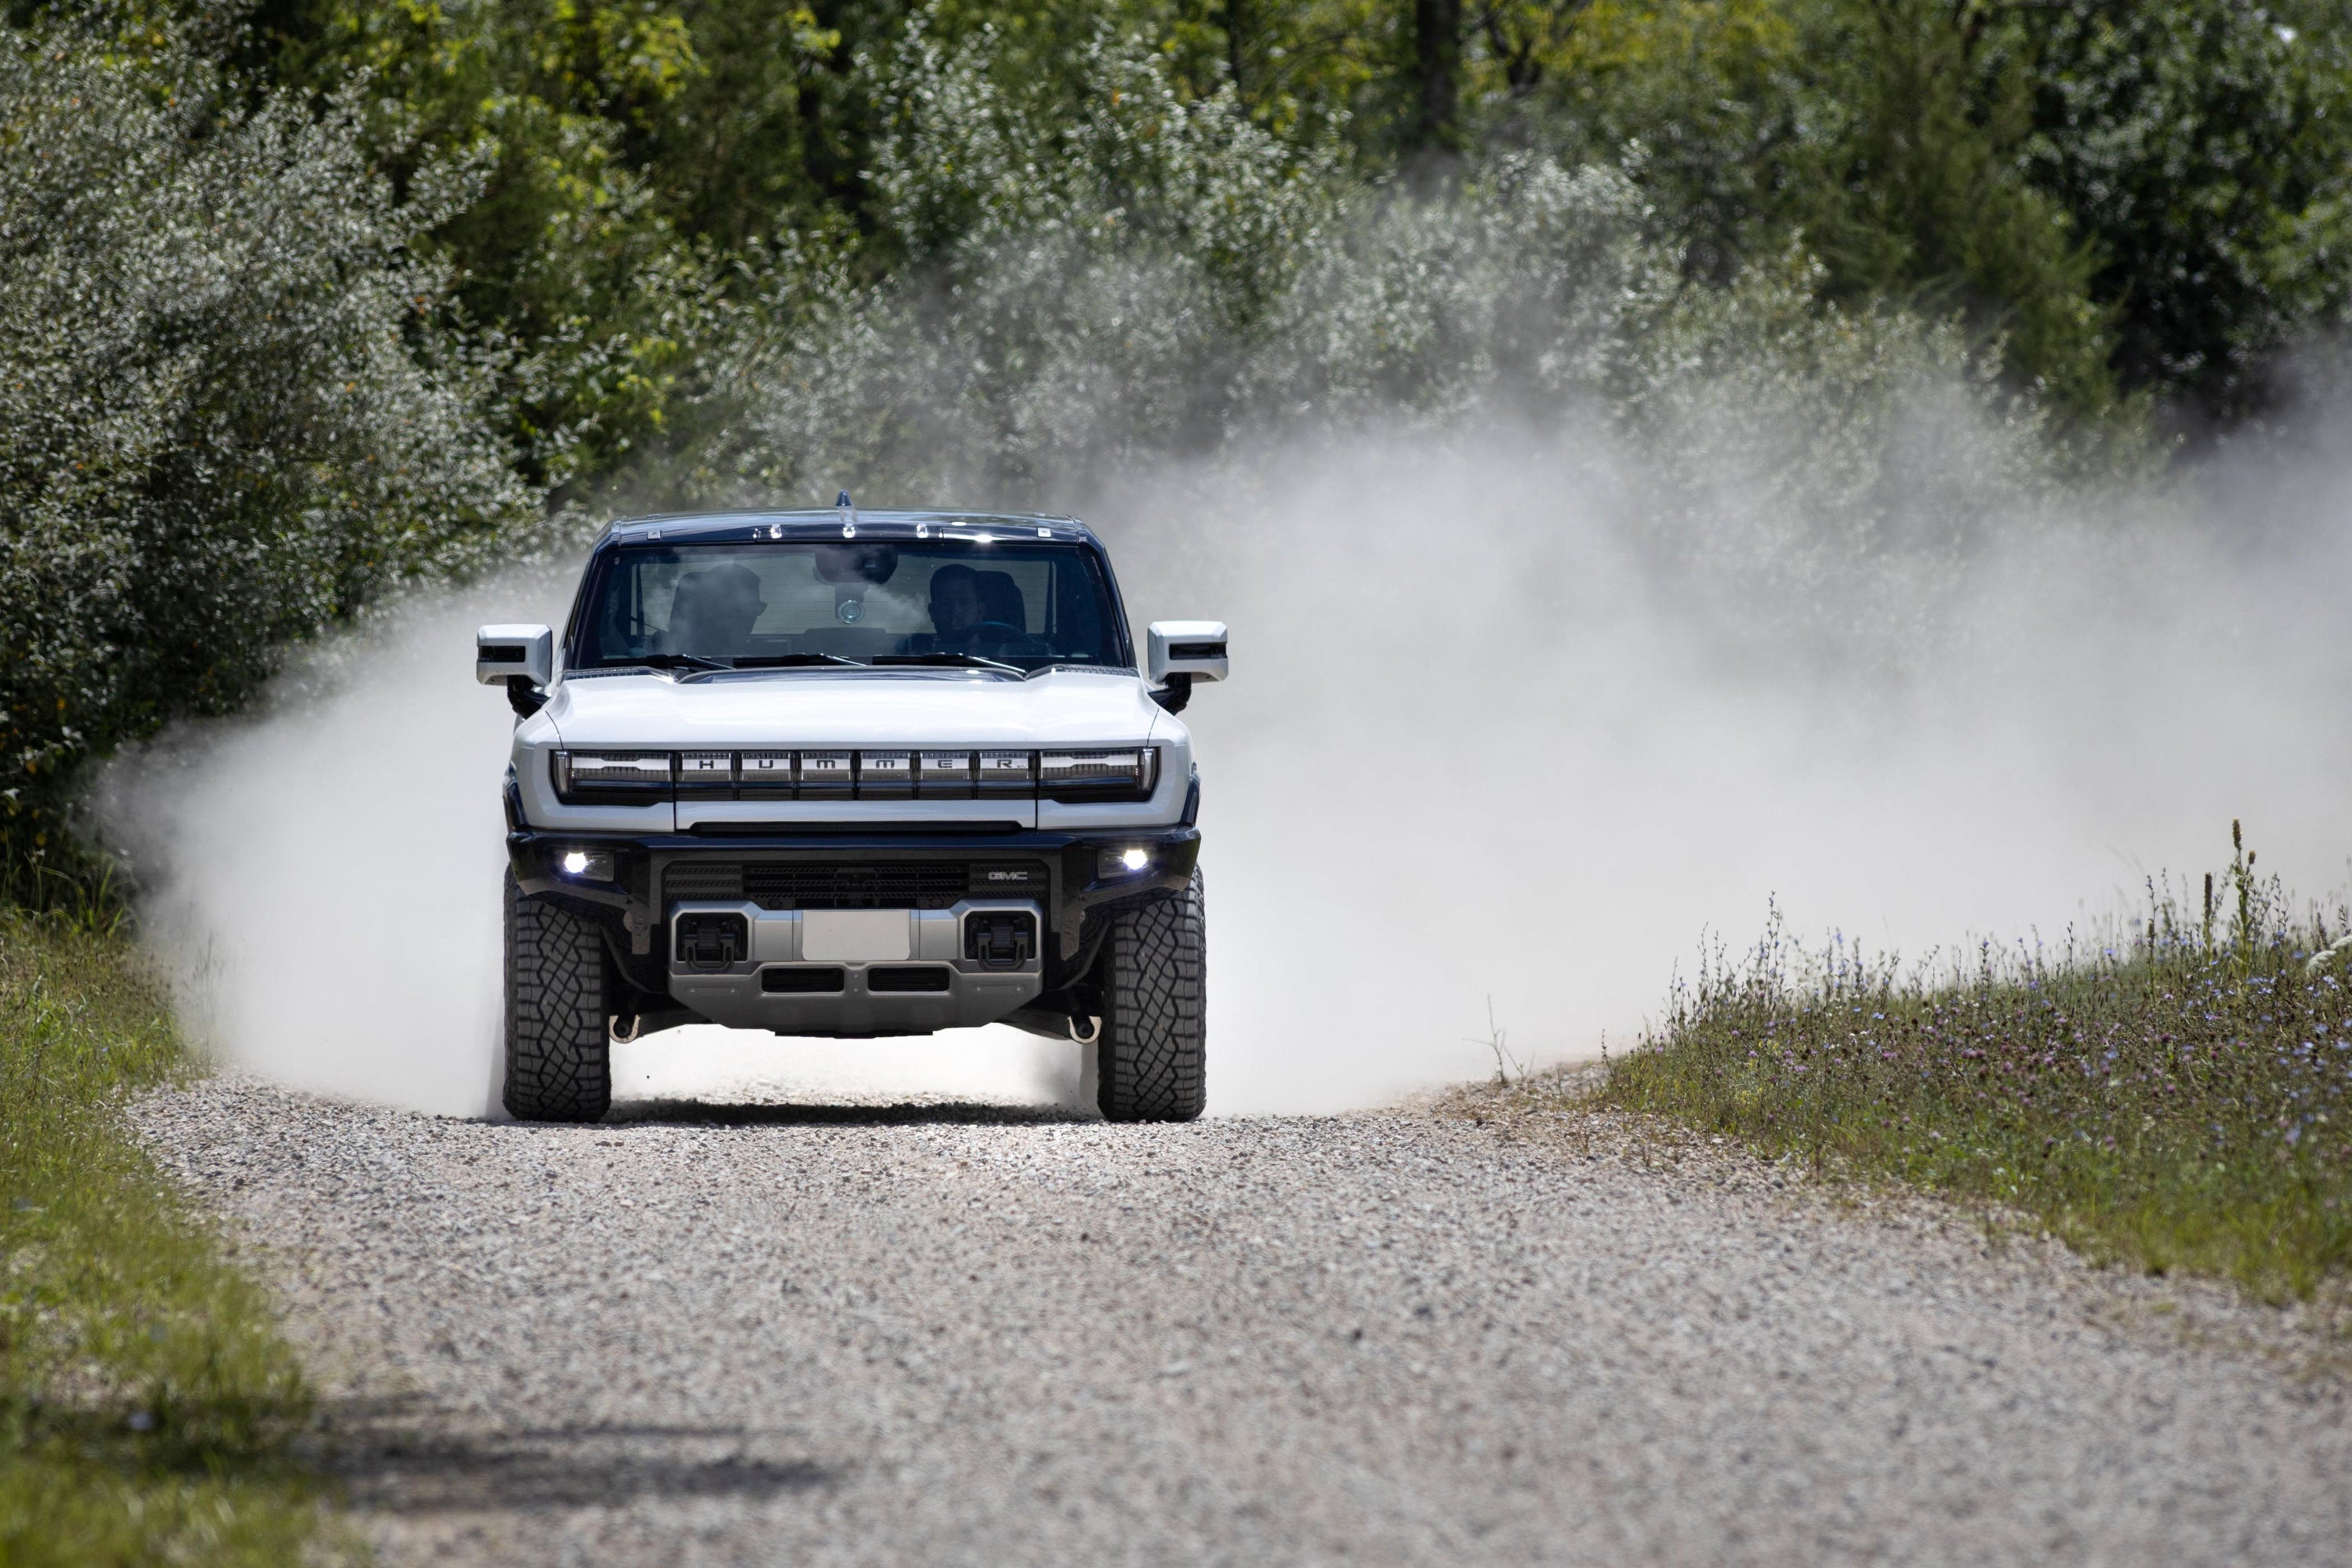 A silver Hummer EV drives down a dusty road.